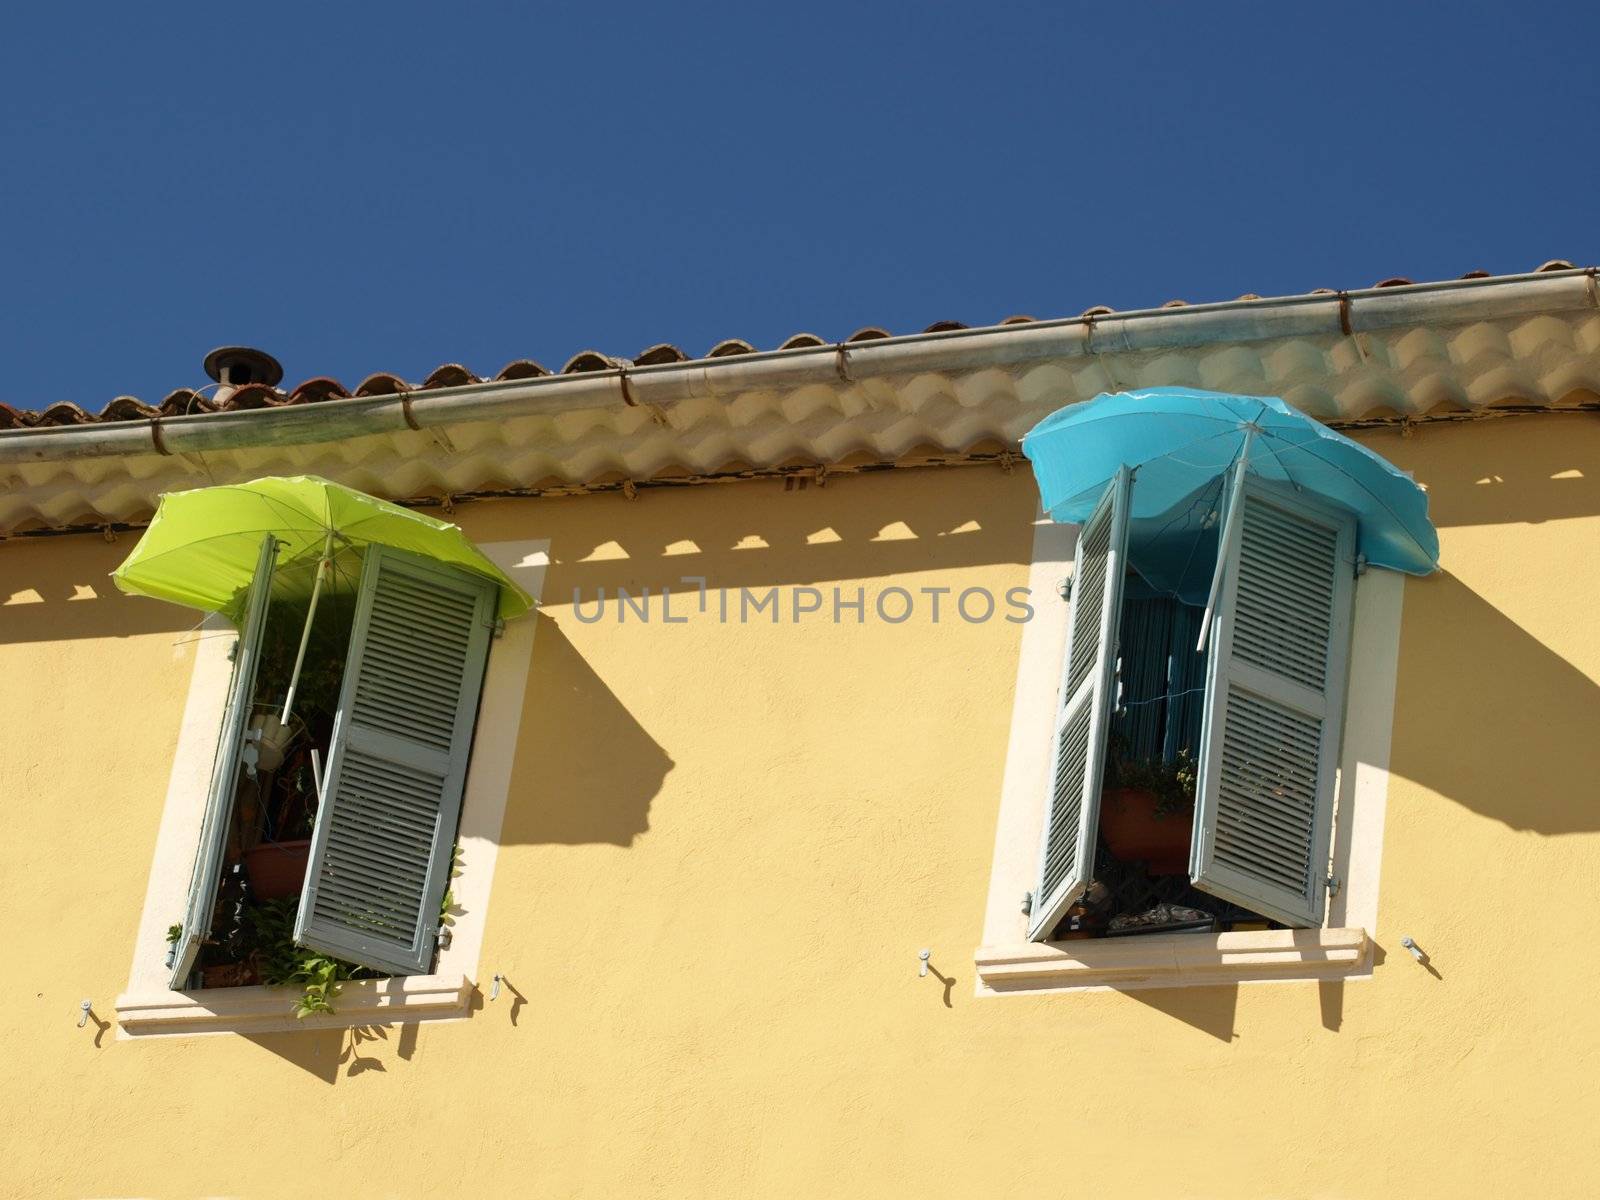 colored umbrellas to protect from sun in a french provence street